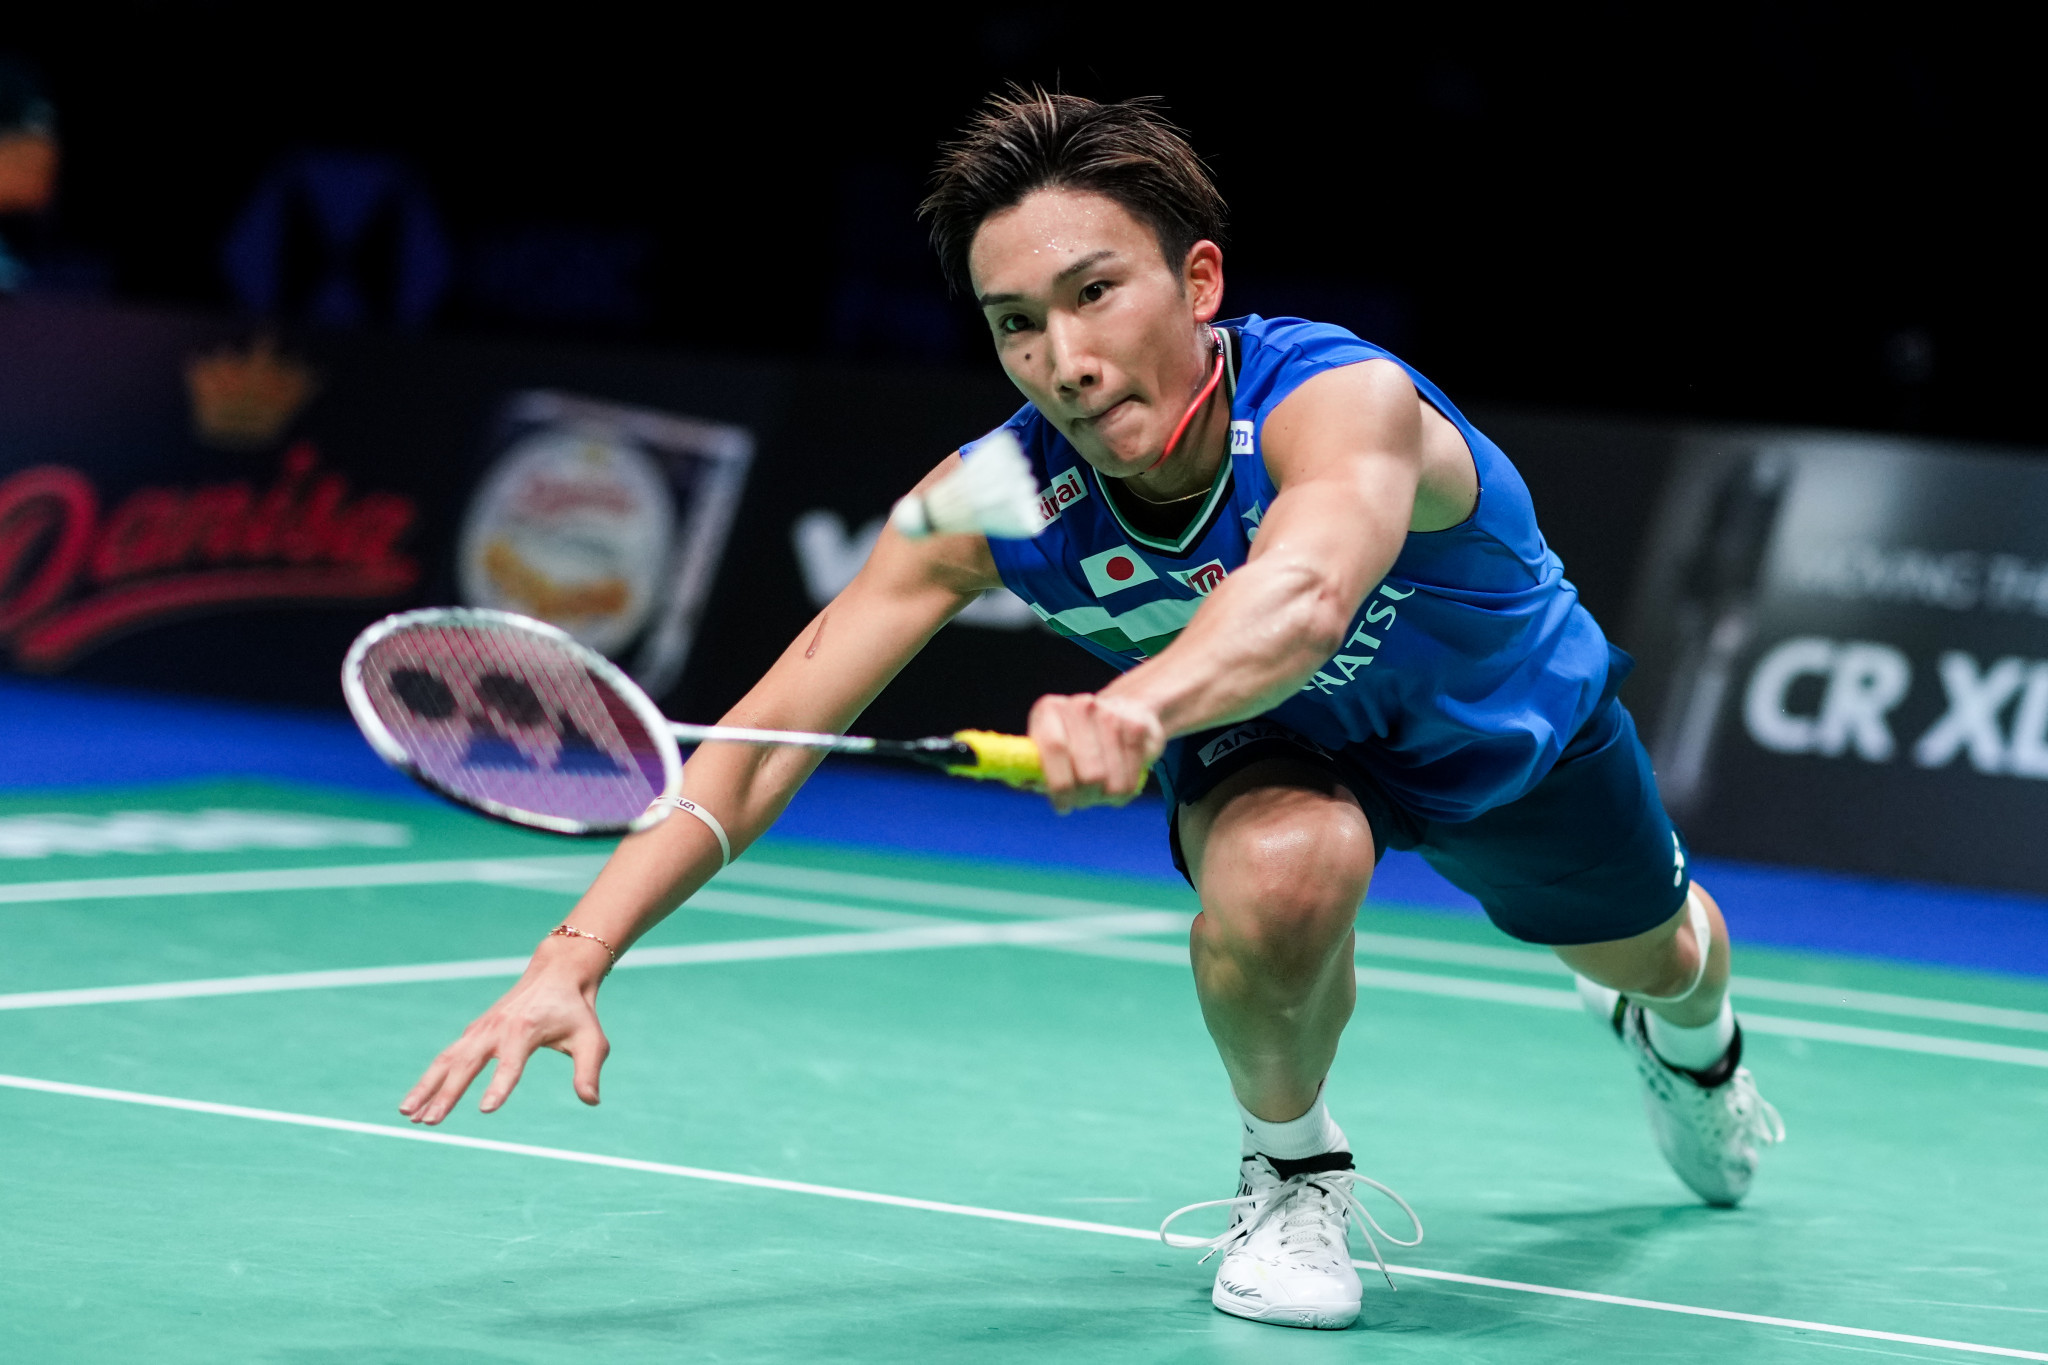 Kento Momota won four-straight points to clinch a tense third game against Kidambi Srikanth and secure his place in the round of 16 ©Getty Images